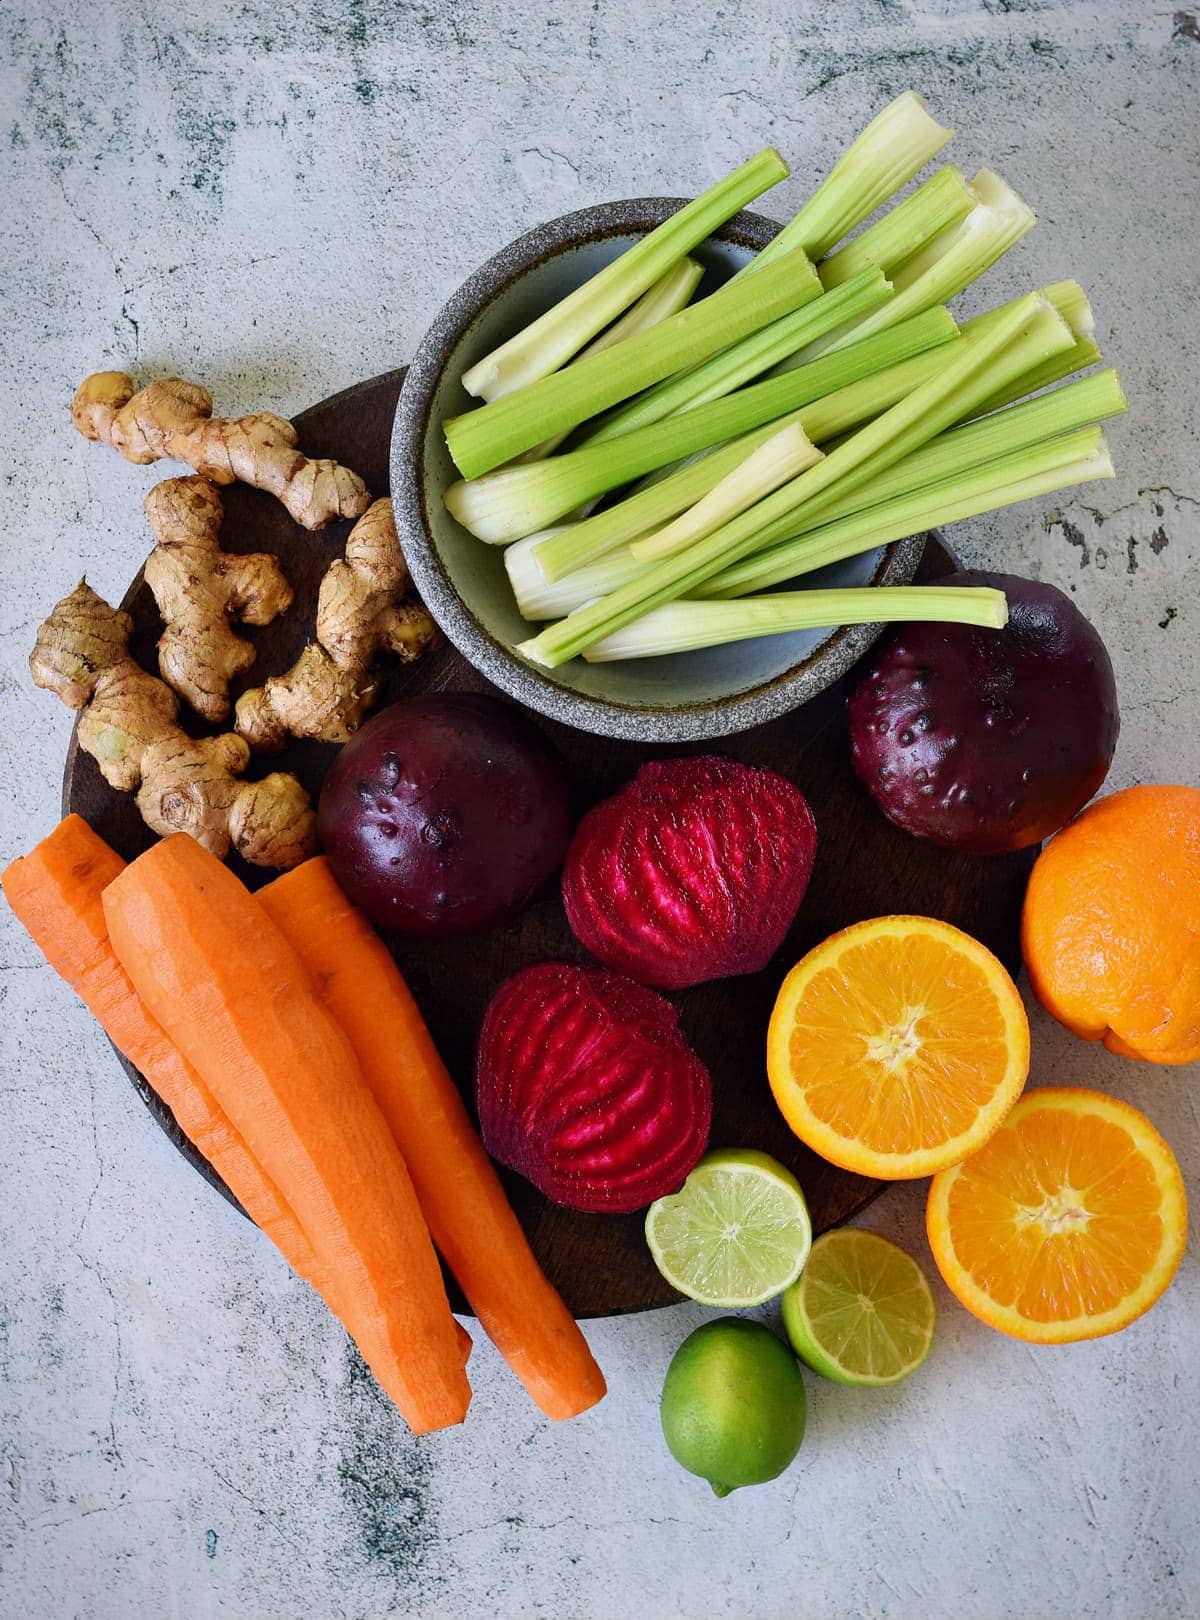 carrots, celery, beetroot, limes, ginger, oranges on cutting board